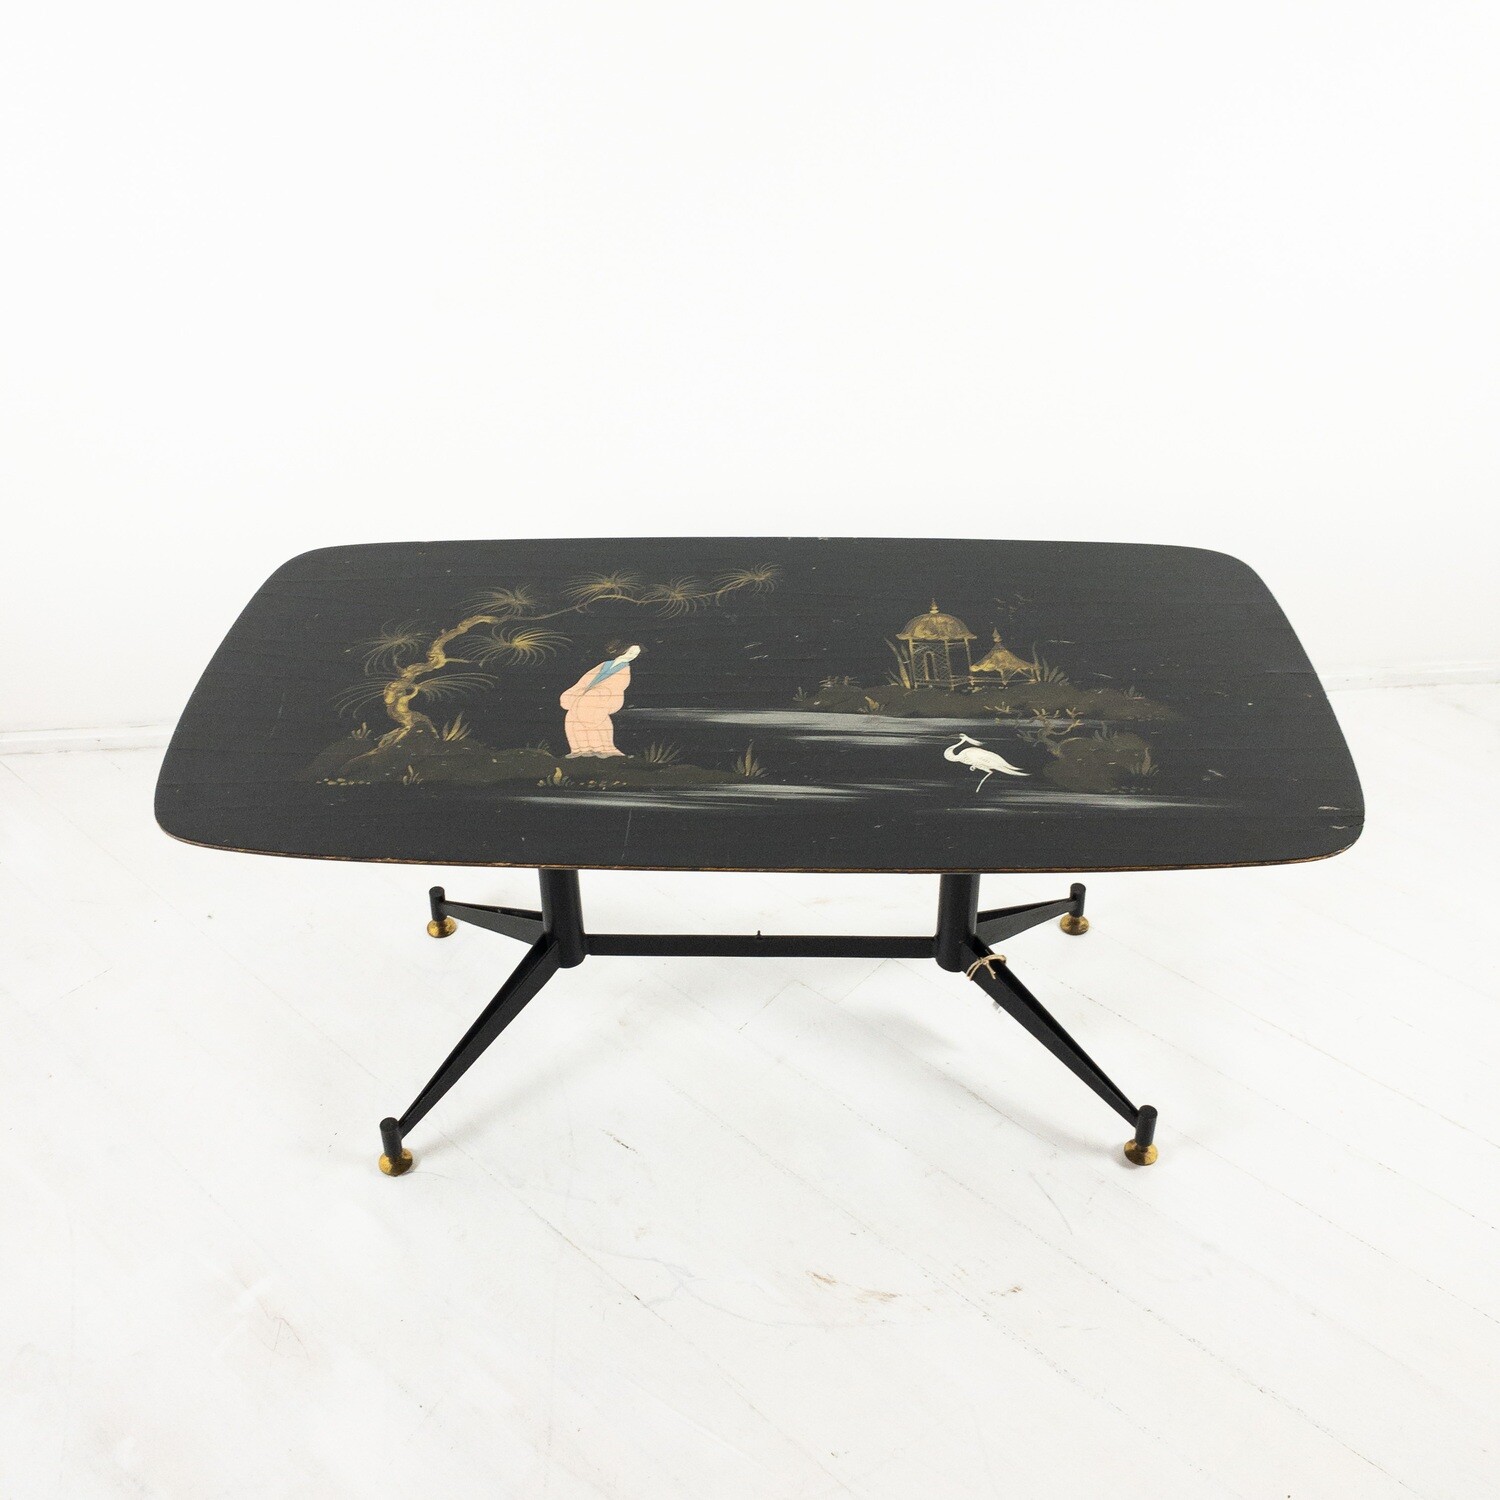 Empire of Japan coffee table